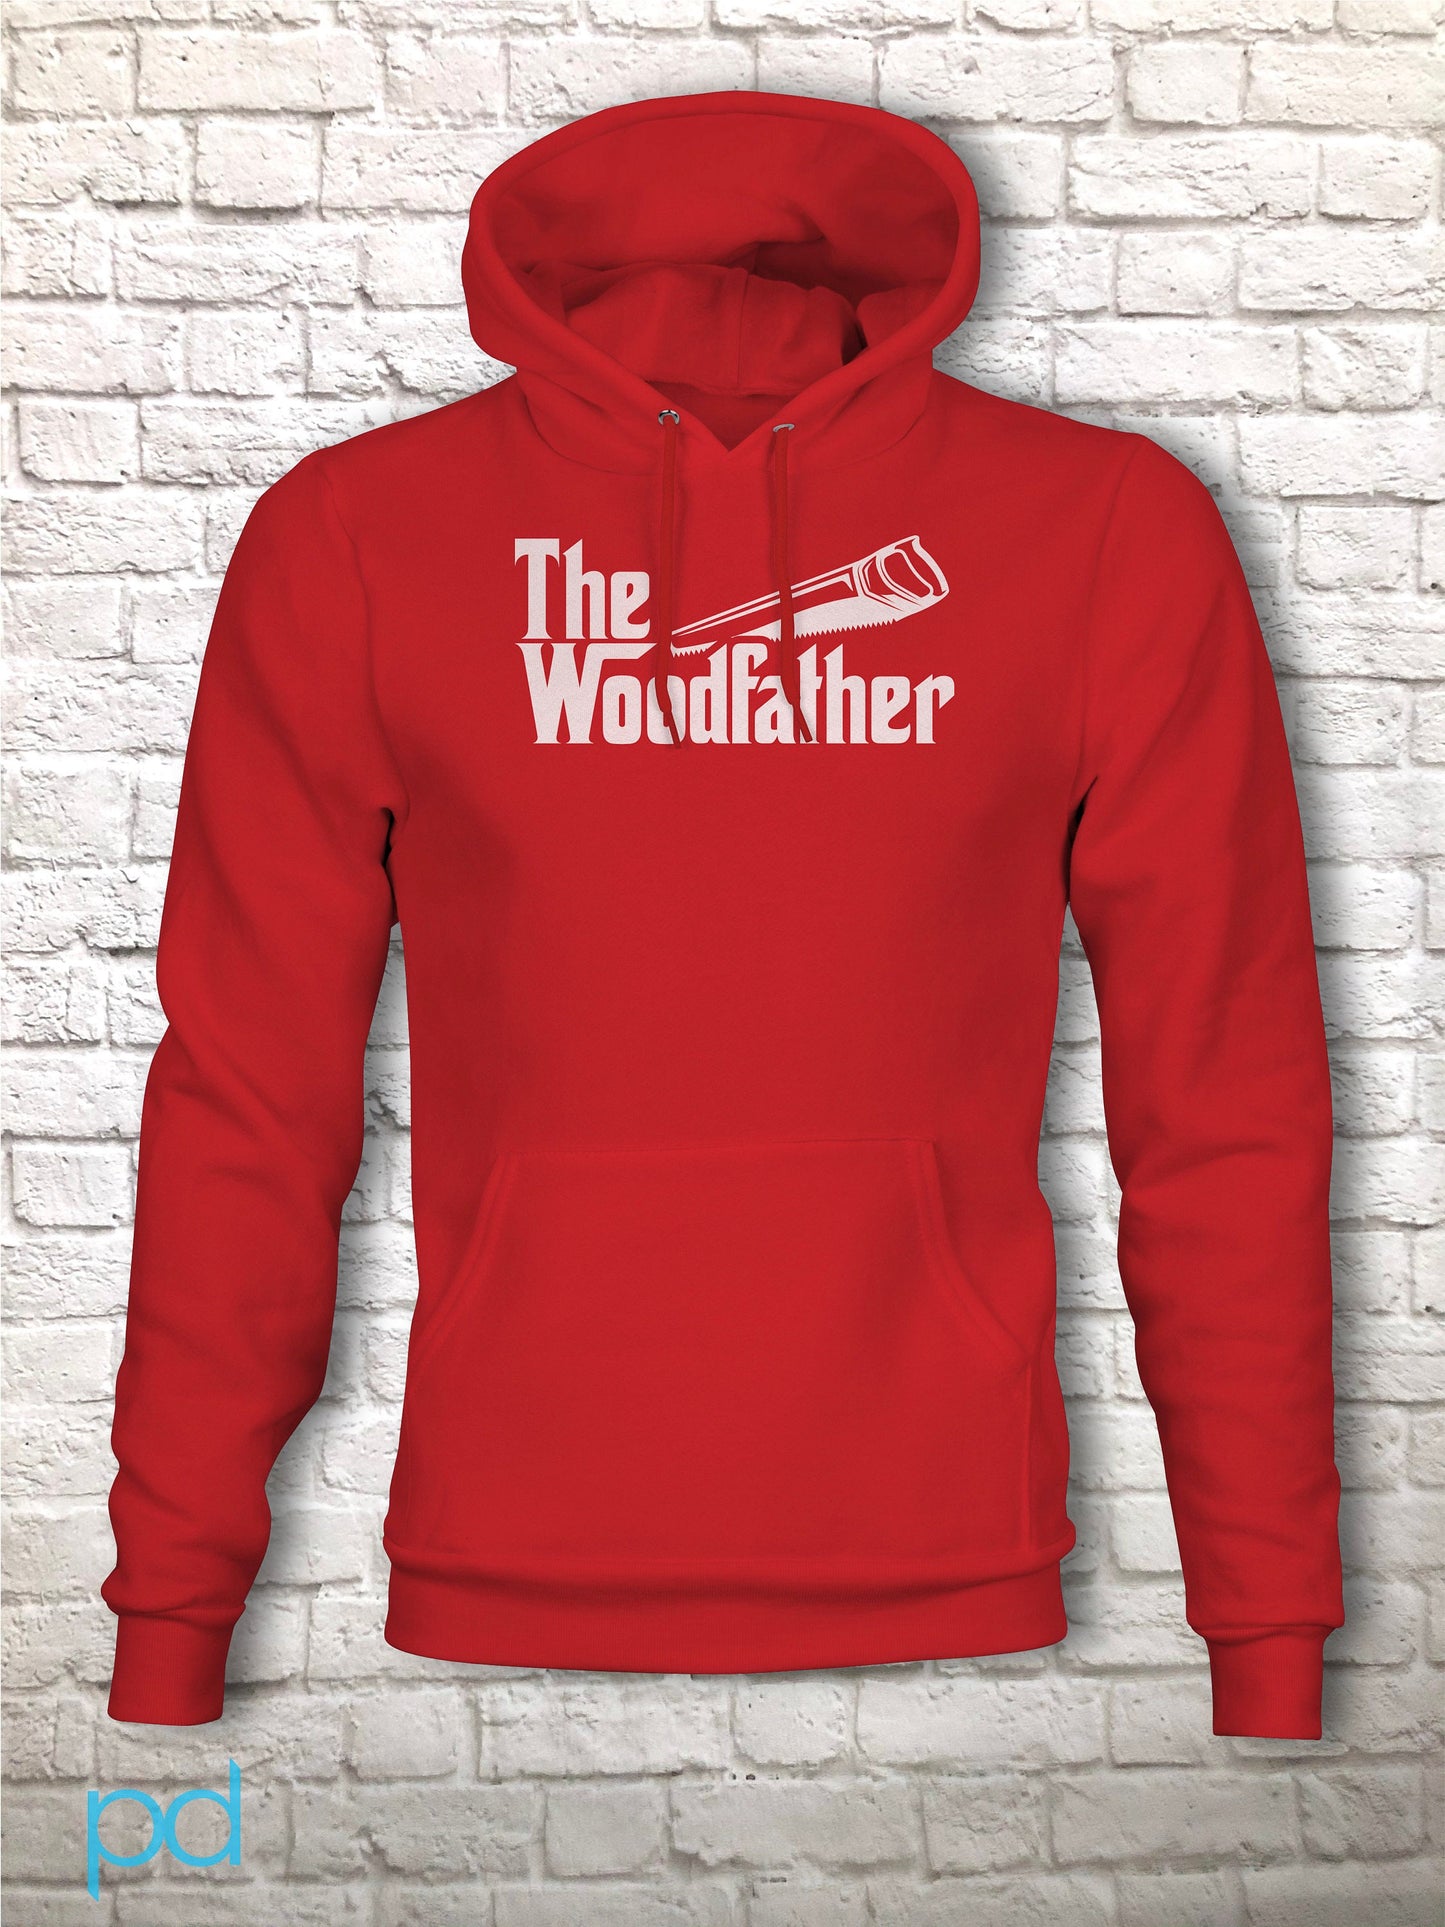 Funny Carpenter Hoodie, Woodfather Parody Gift Idea, Humorous Woodworking Joiner Pullover Hoody, Handsaw Clean